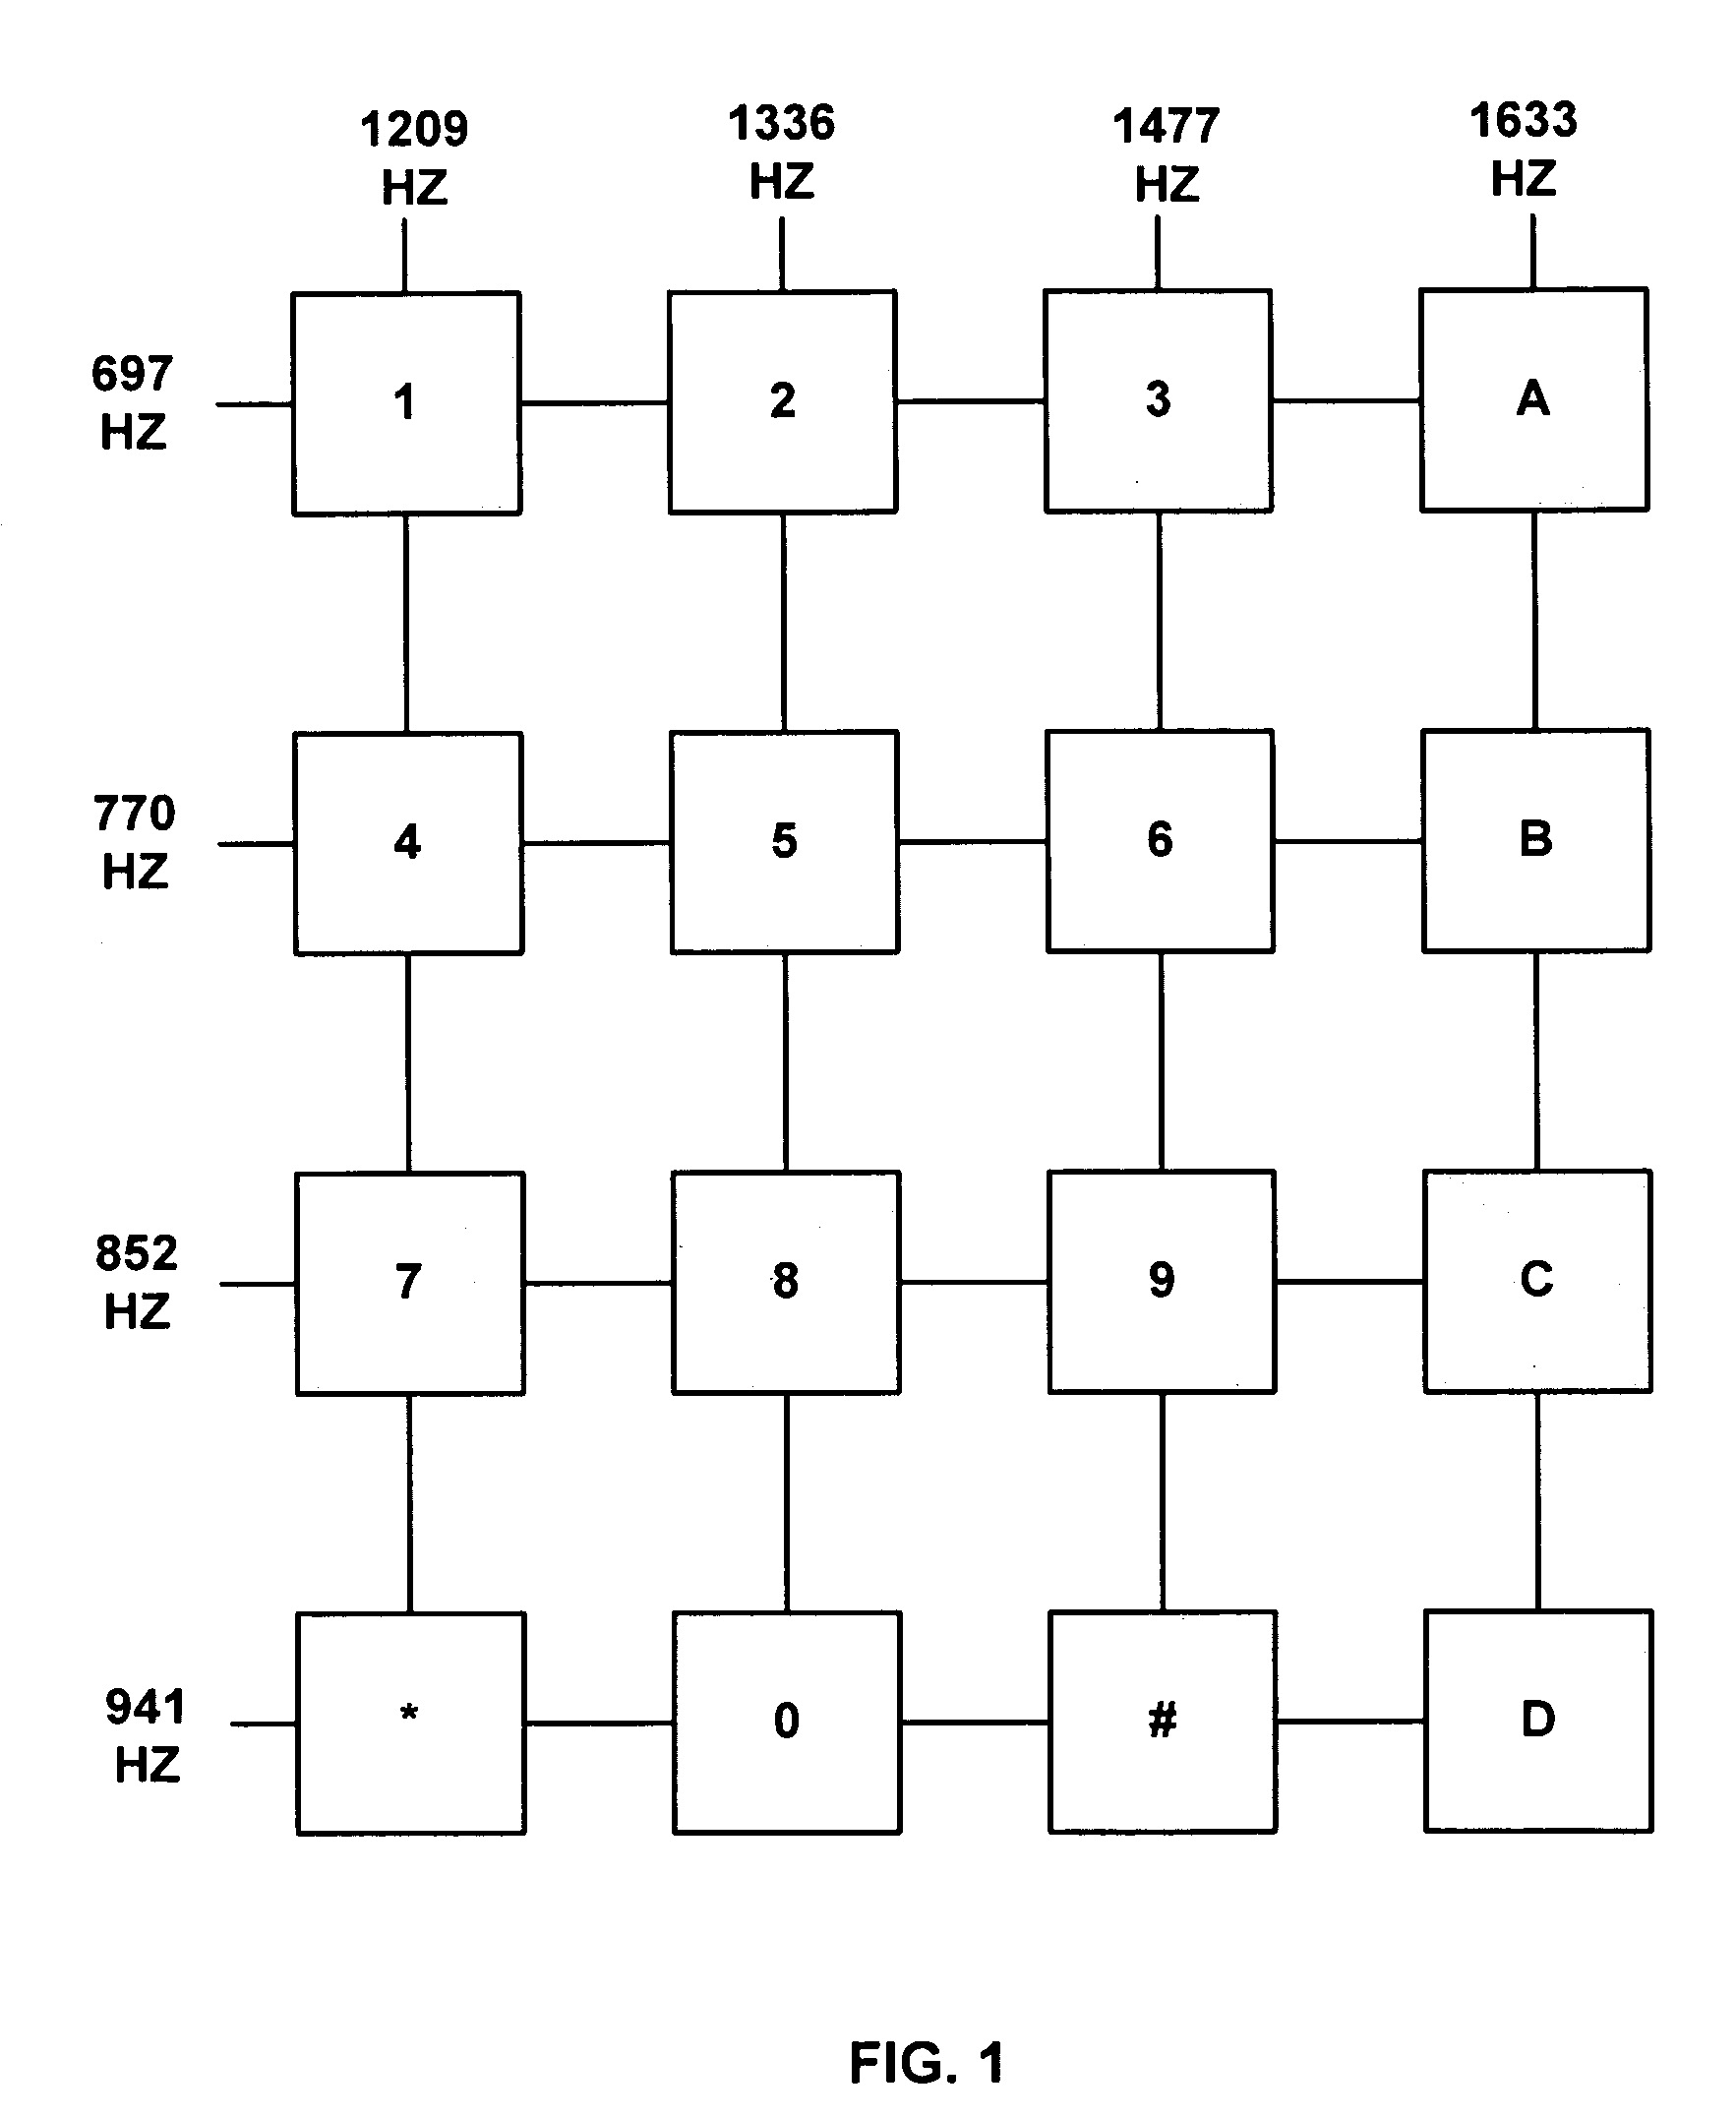 Method and apparatus for evaluating possible 3-way call events